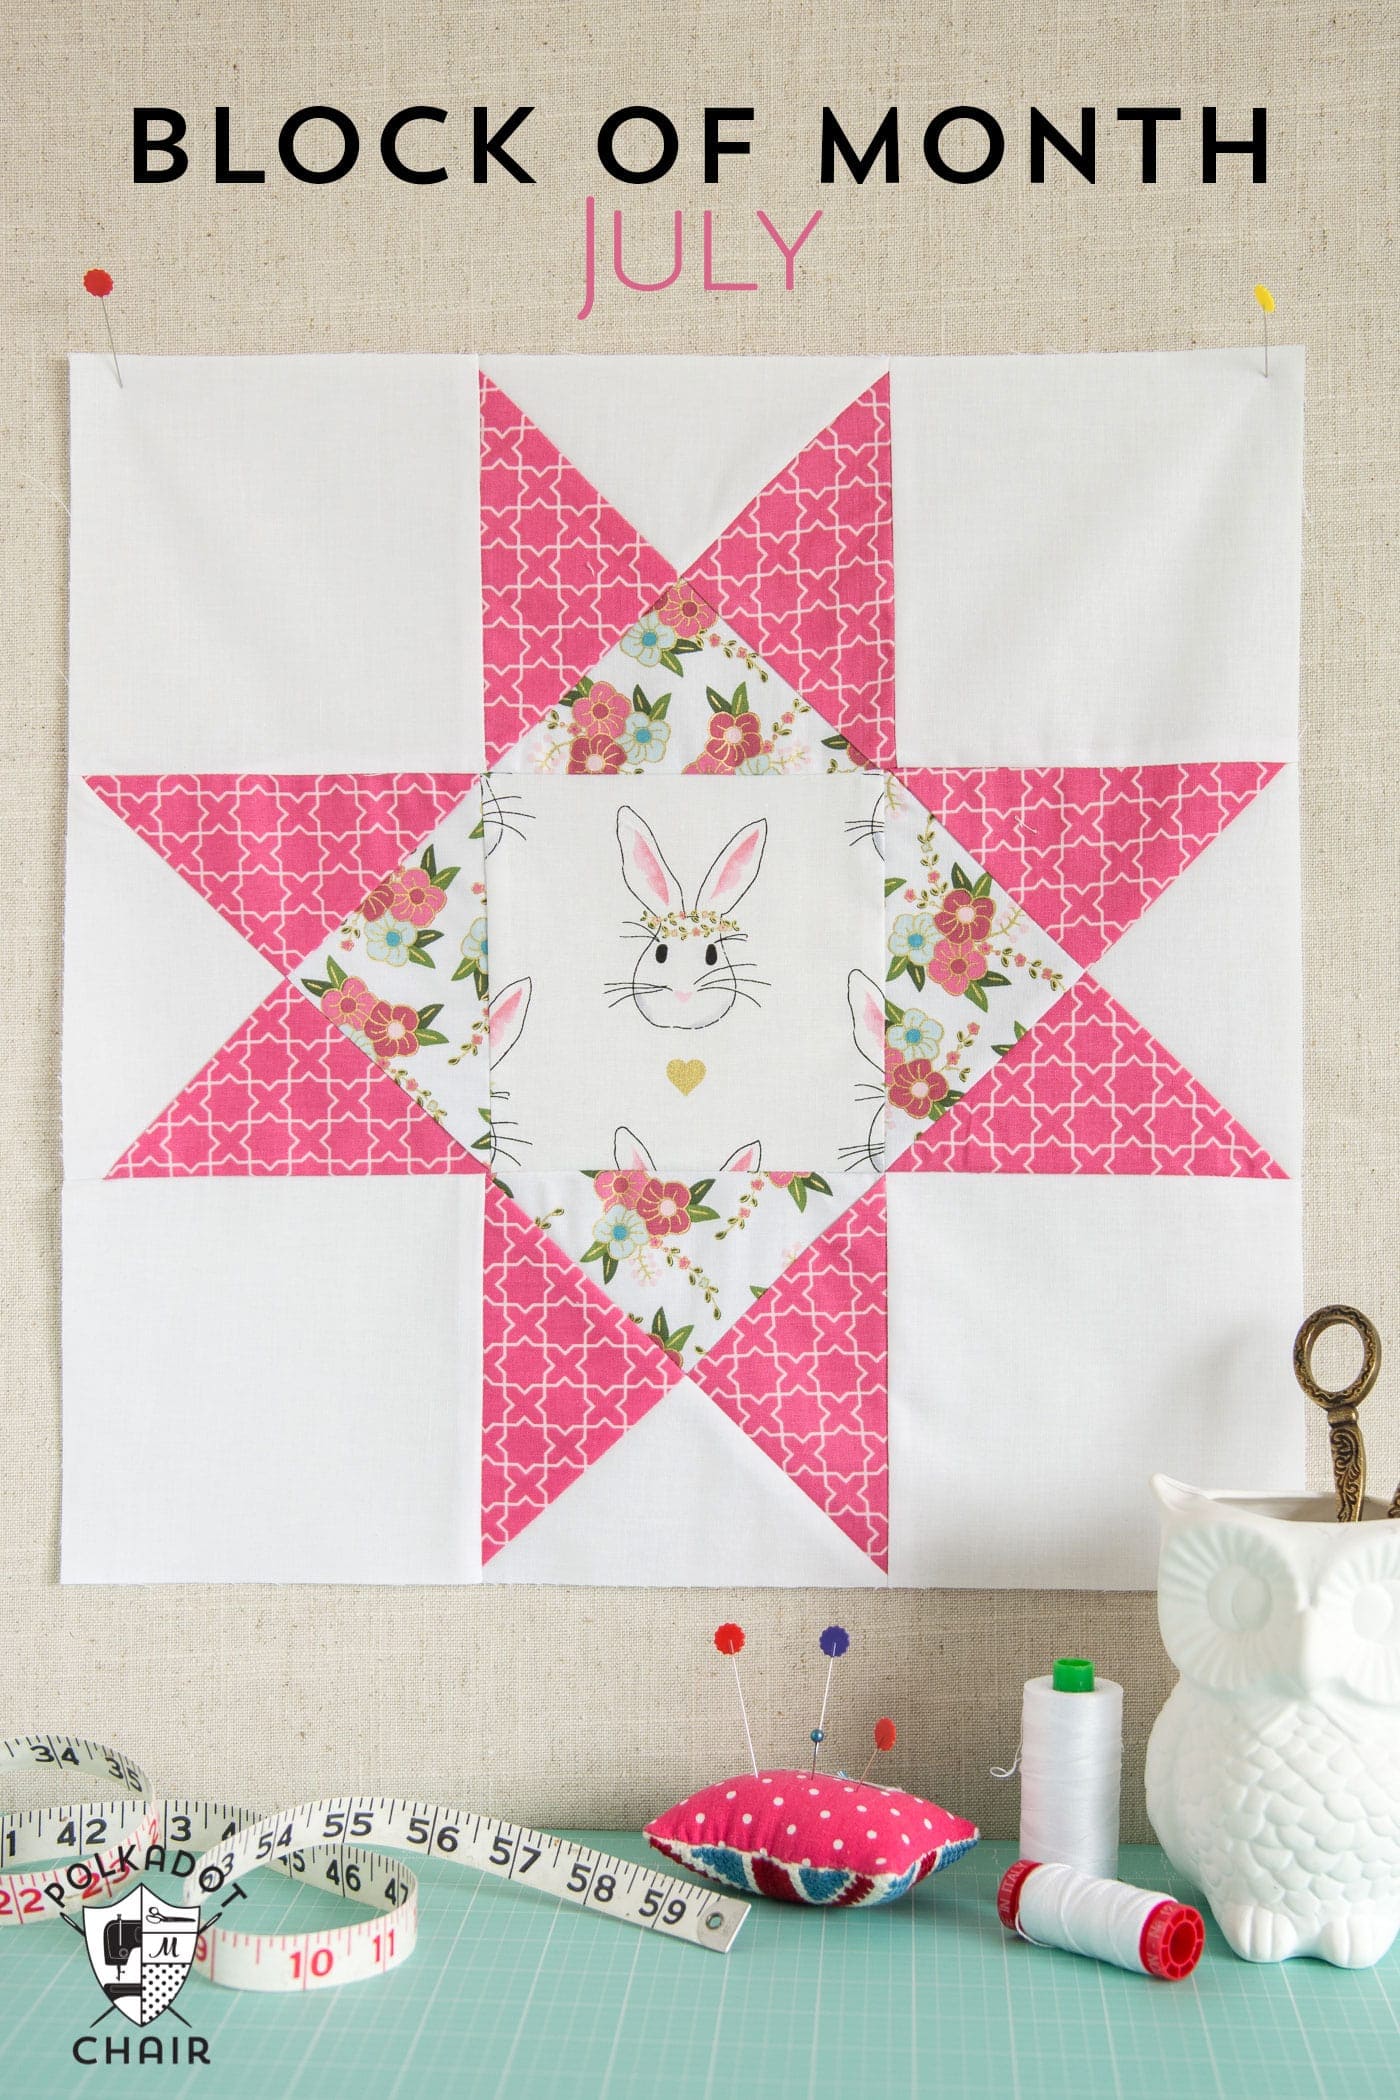 How to Make an Ohio Star Quilt Block – The July Block of the Month